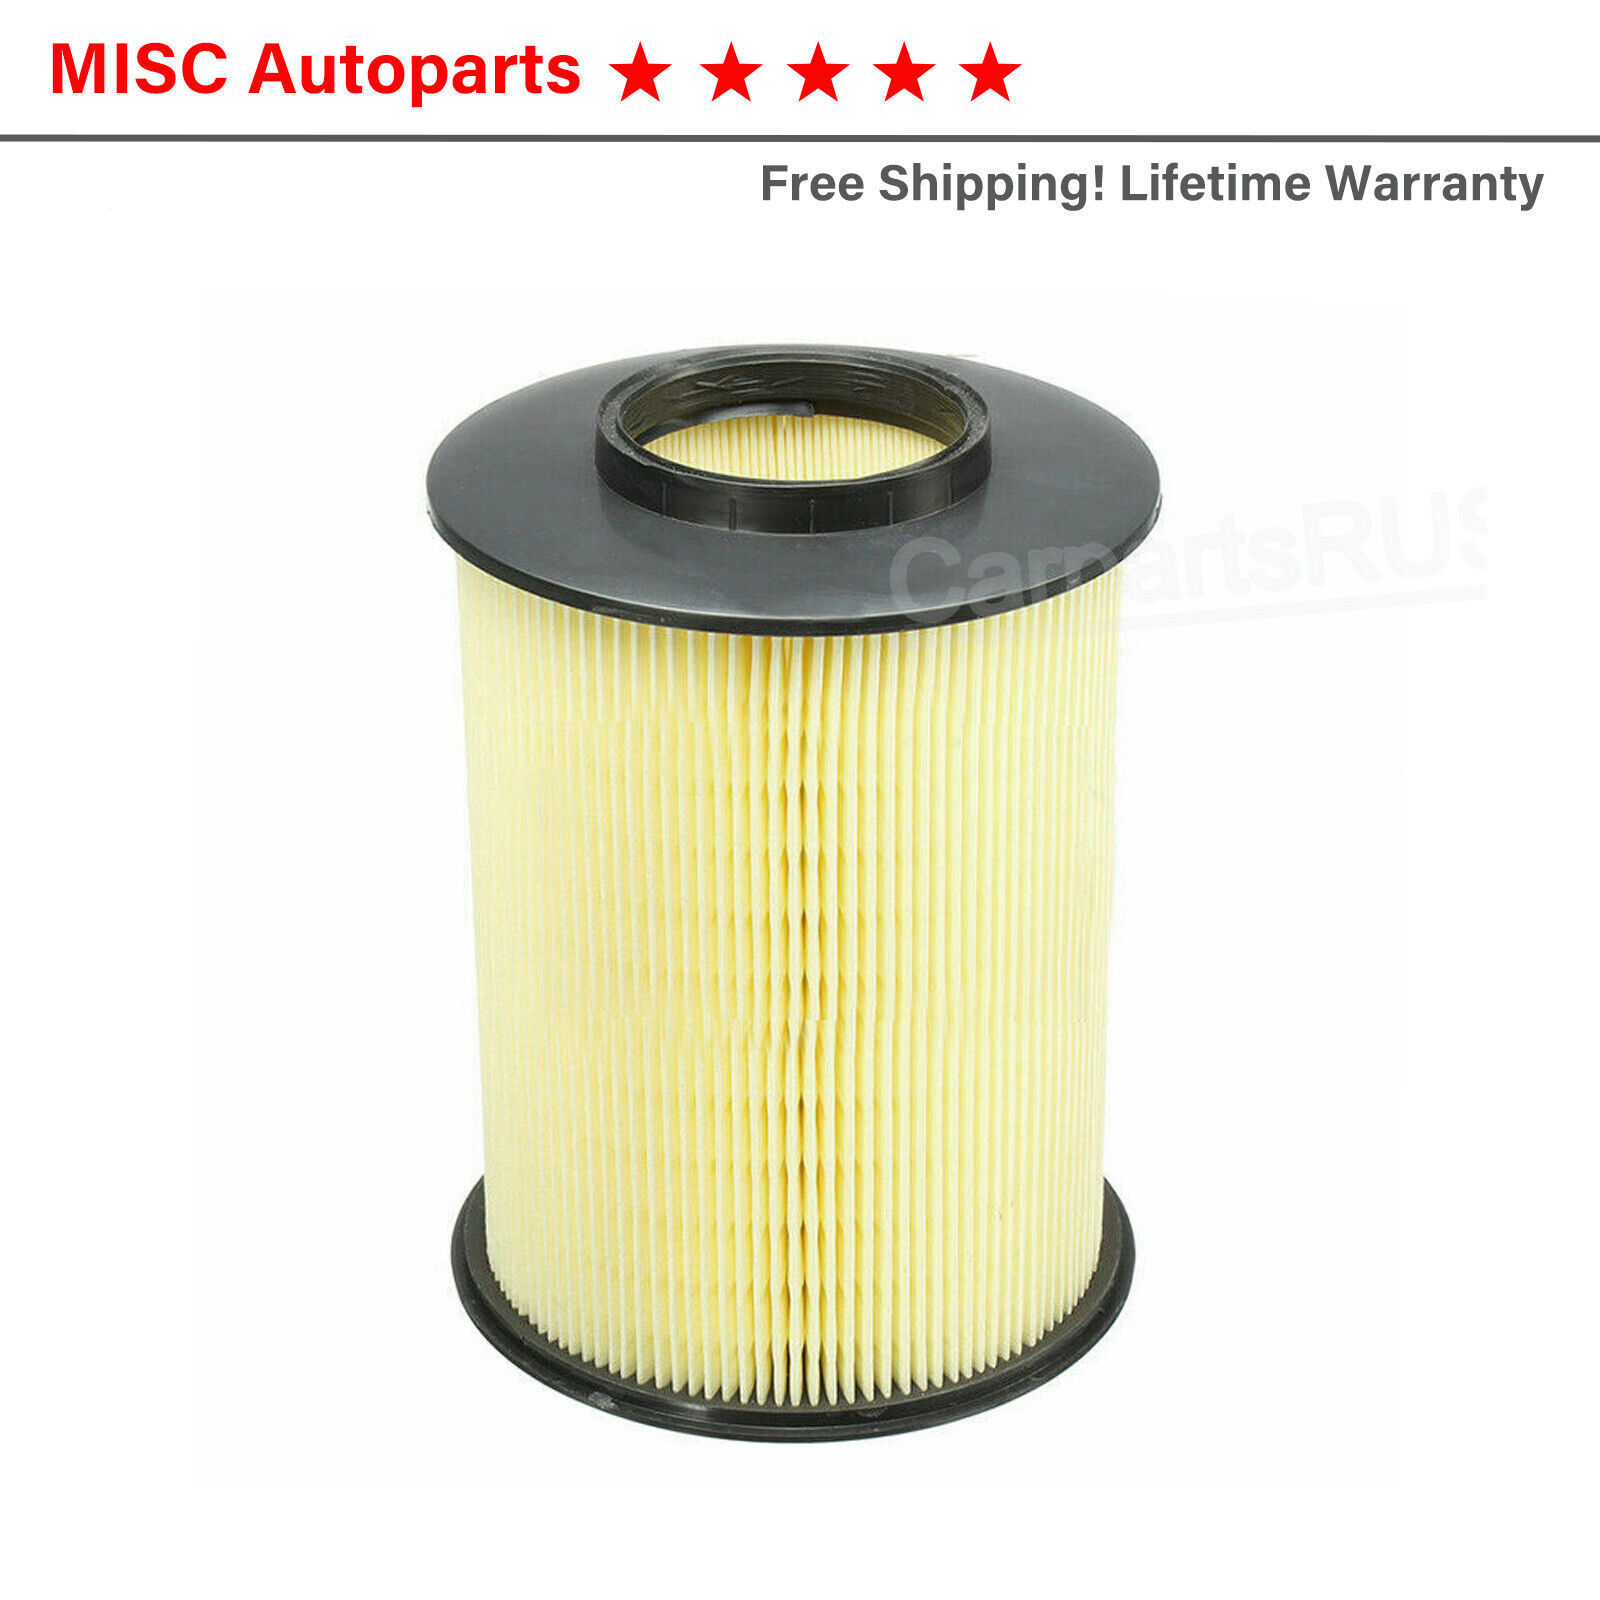 Engine Air Filter for FORD ESCAPE FOCUS TRANSIT 1.6L CONNECT MKC